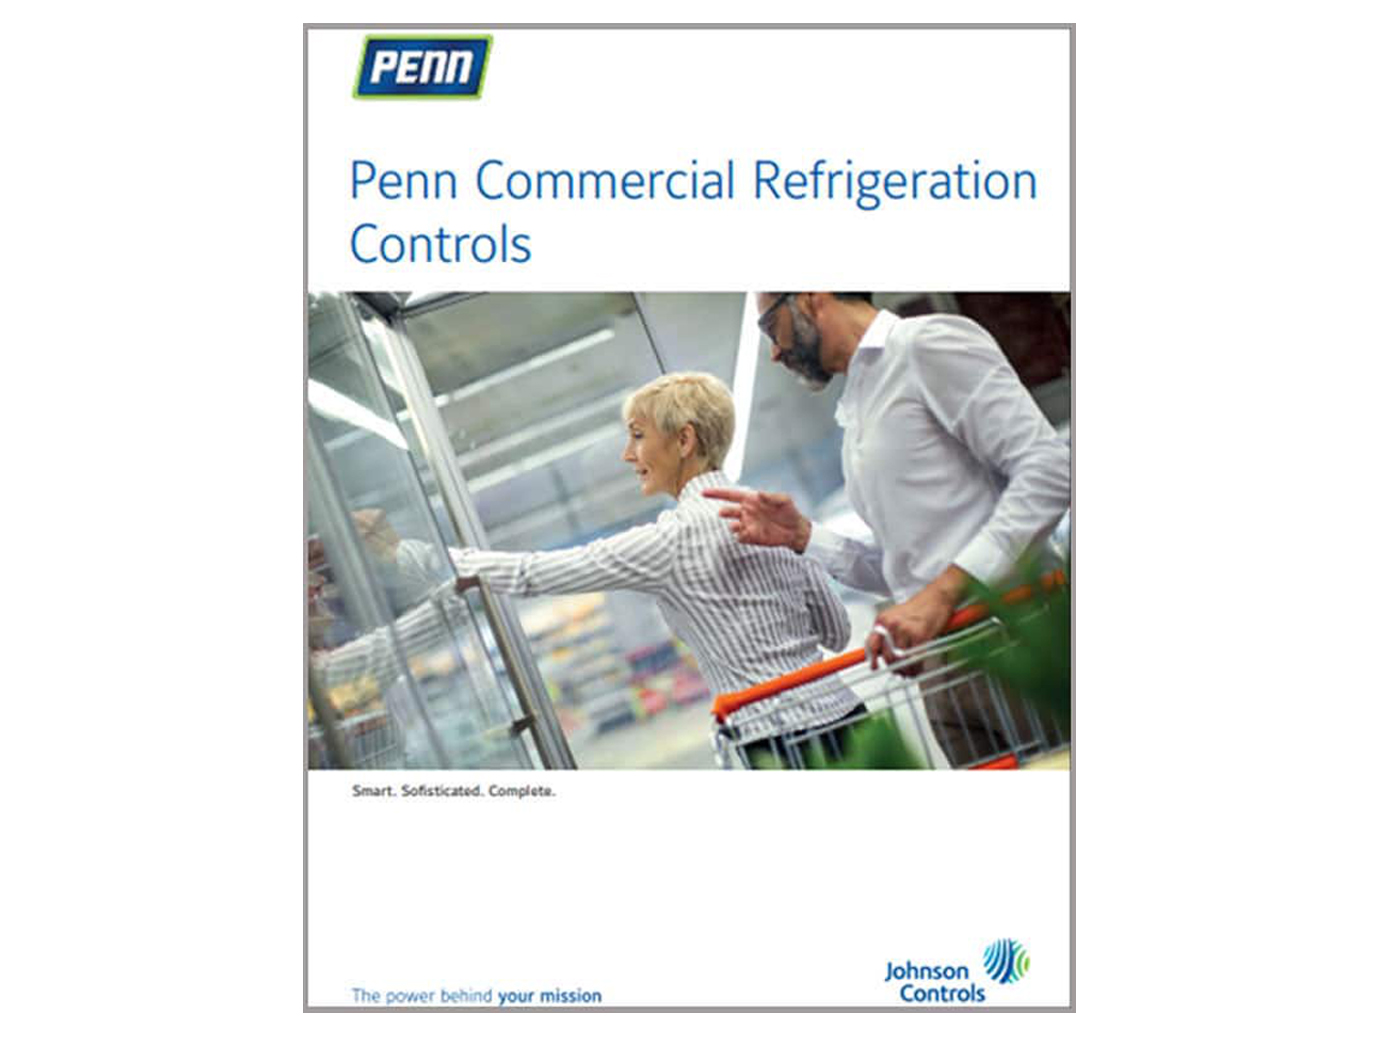 Cover page of PENN Commercial Refrigeration Controls brochure